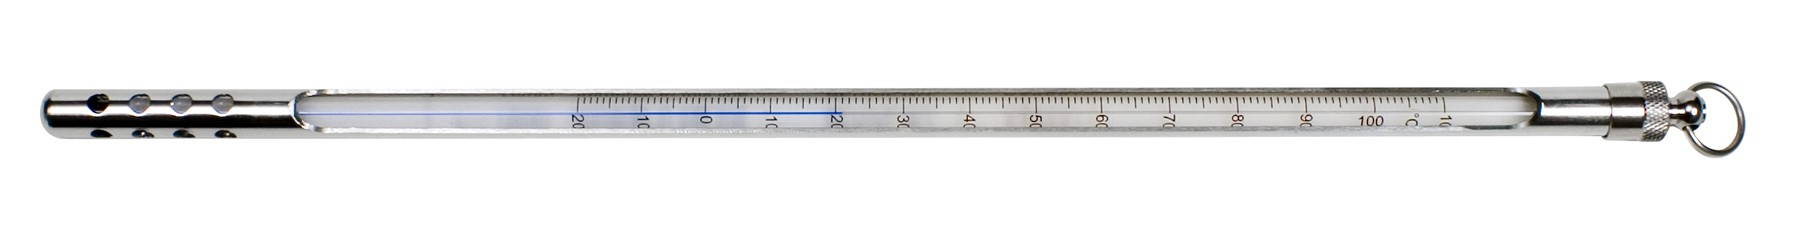 H-B DURAC Plus Armored Liquid-In-Glass Thermometer; -10 to 205C, 76mm Immersion, Organic Liquid Fill